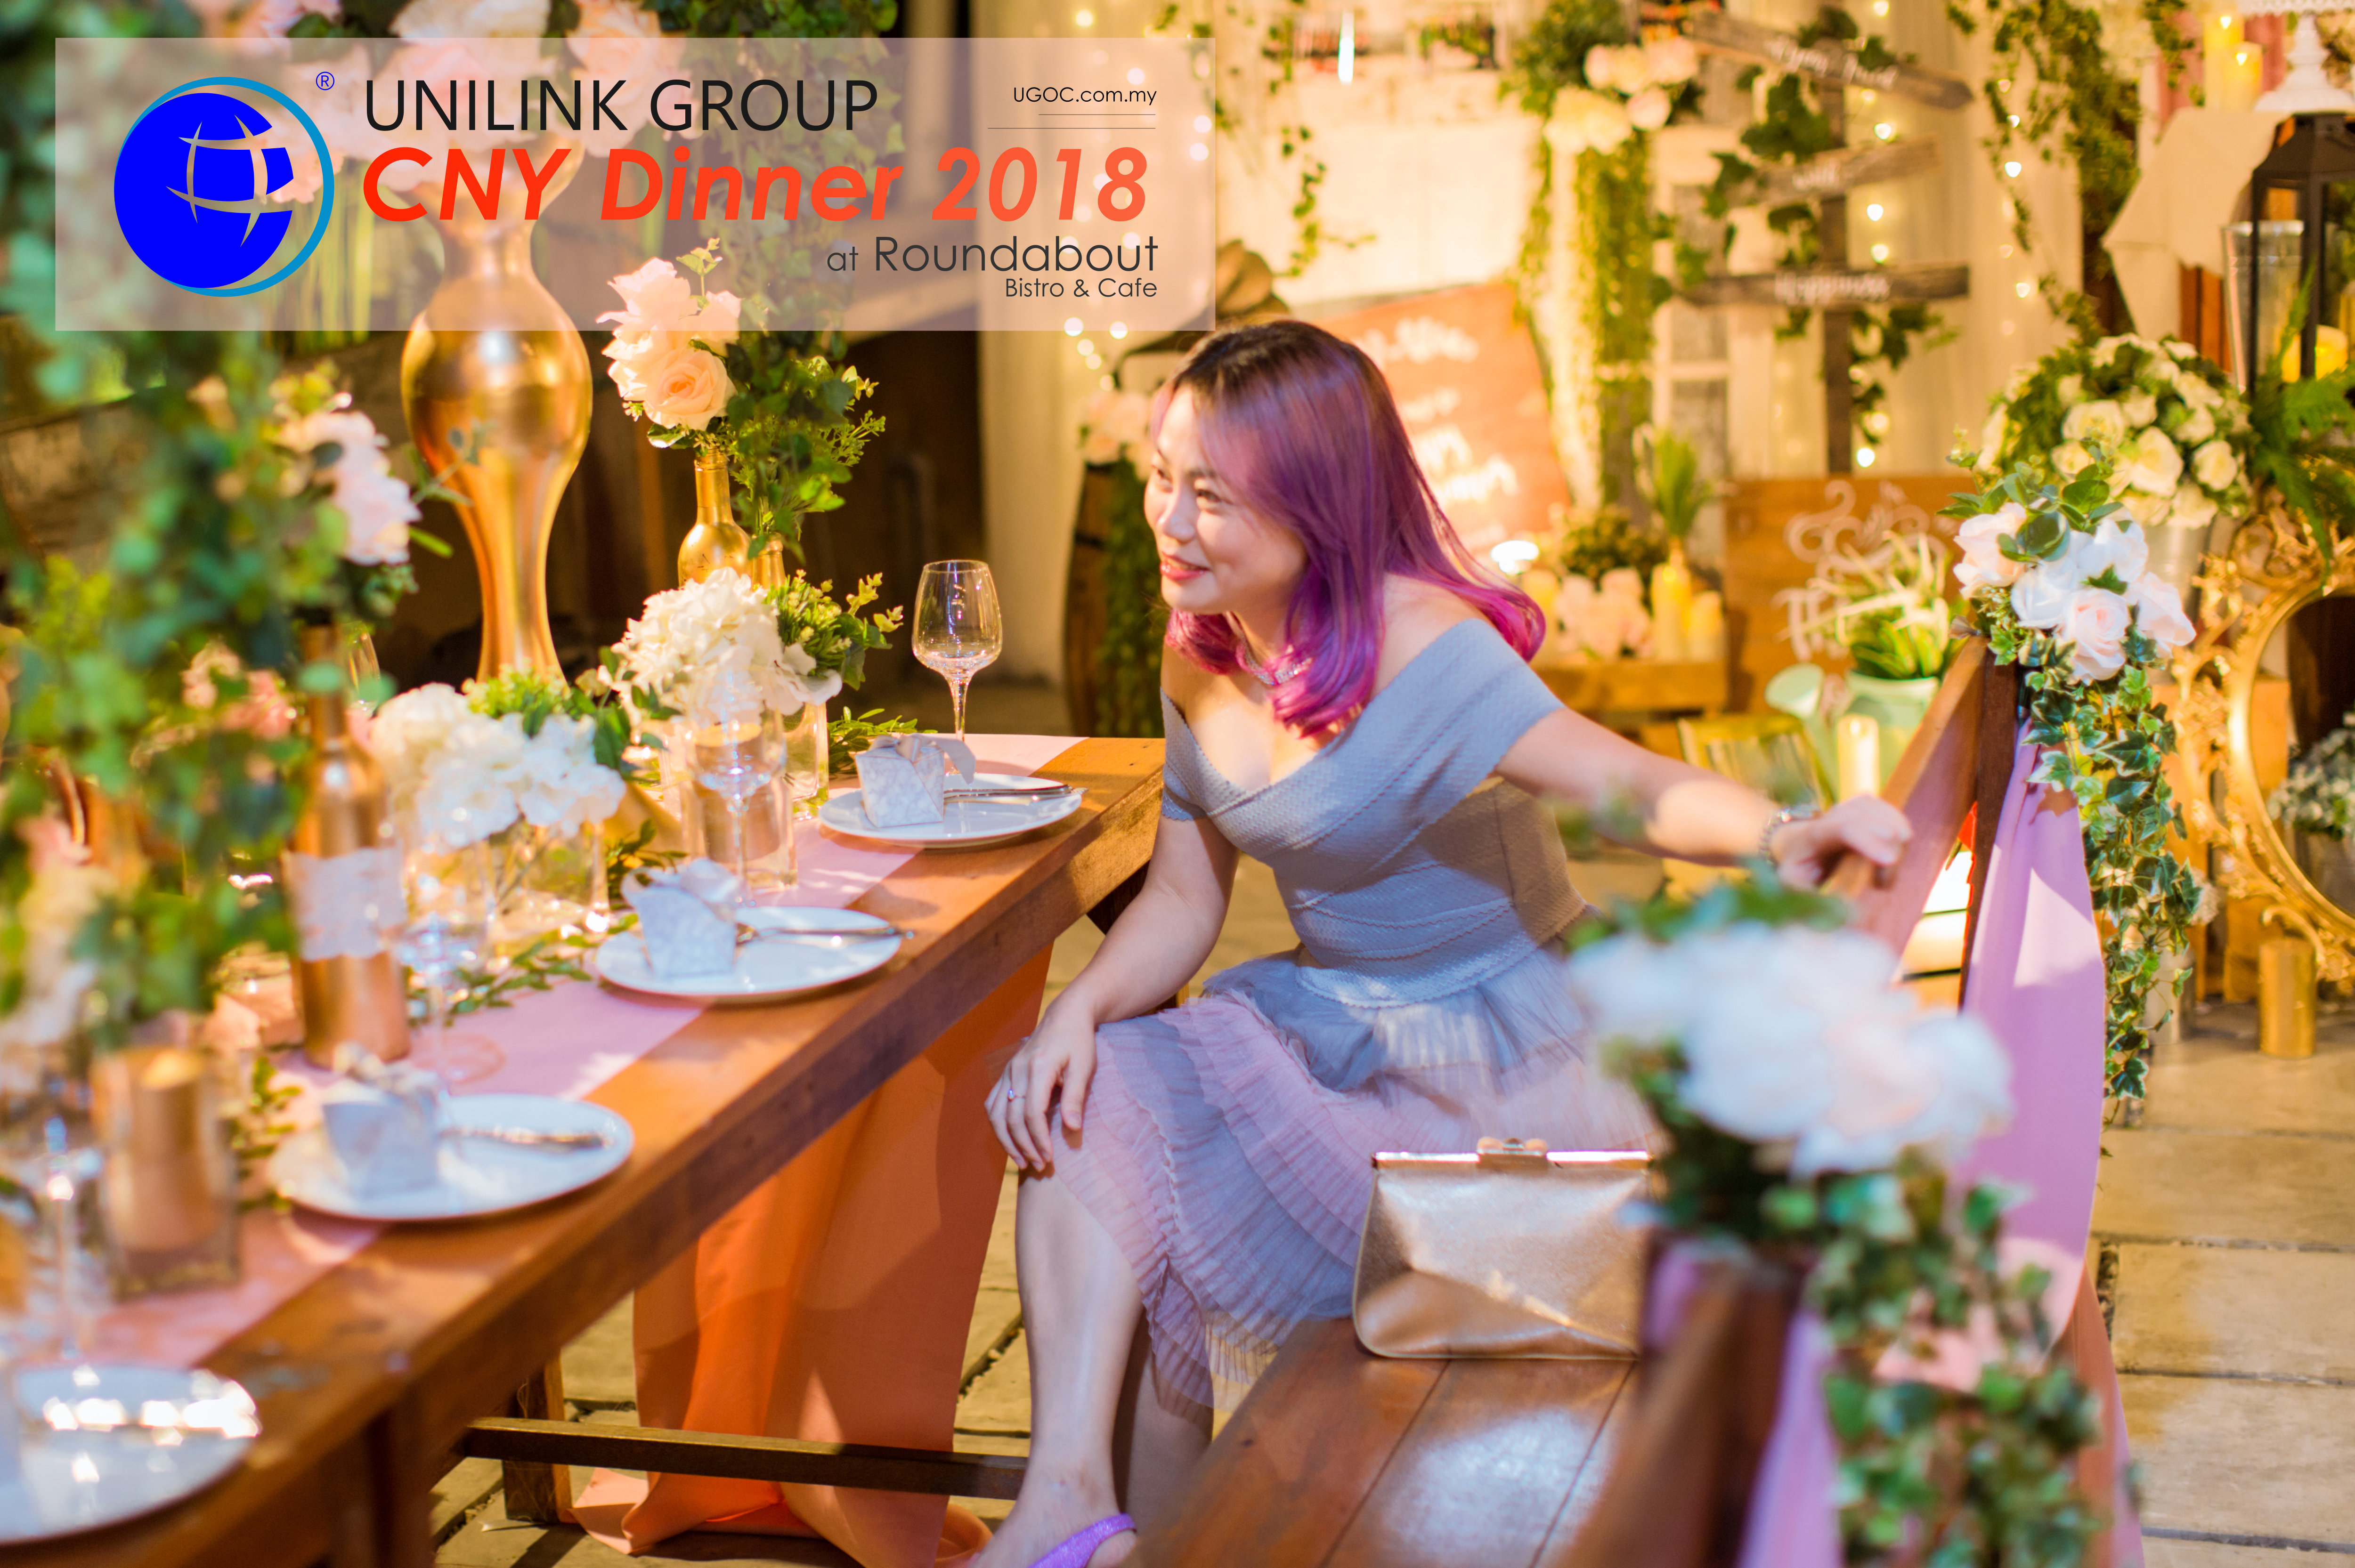 Unilink Group Chinese New Year Dinner 2018 from Agensi Pekerjaan Unilink Prospects Sdn Bhd at Roundabout Bisrto and Cafe 28